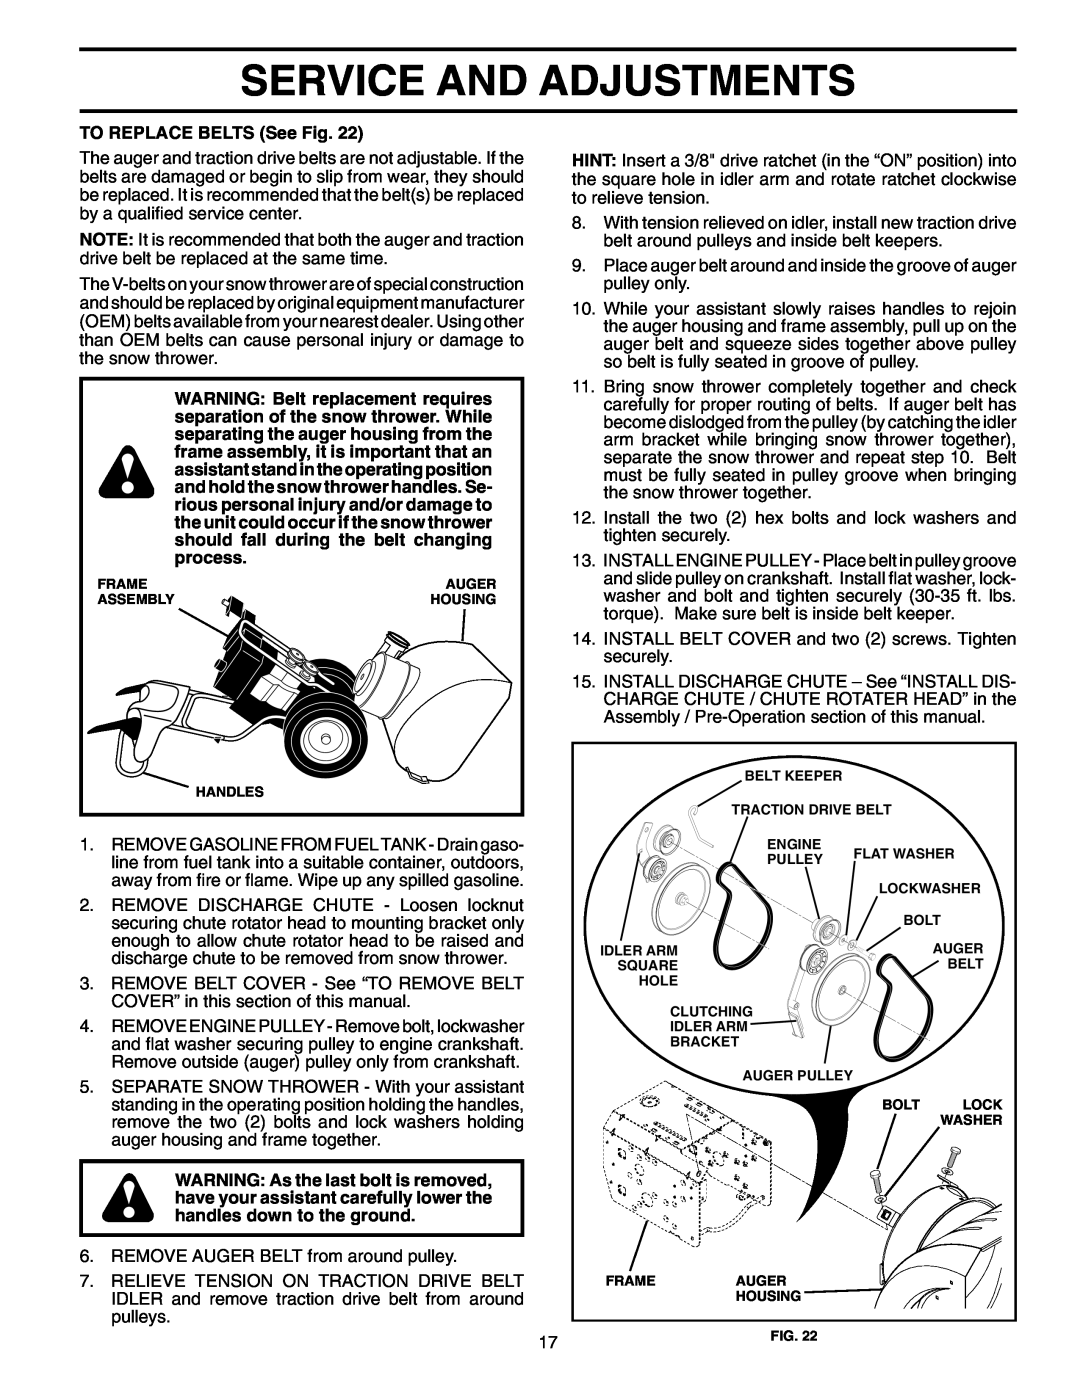 Husqvarna 8527SBEB owner manual Service And Adjustments, TO REPLACE BELTS See Fig 